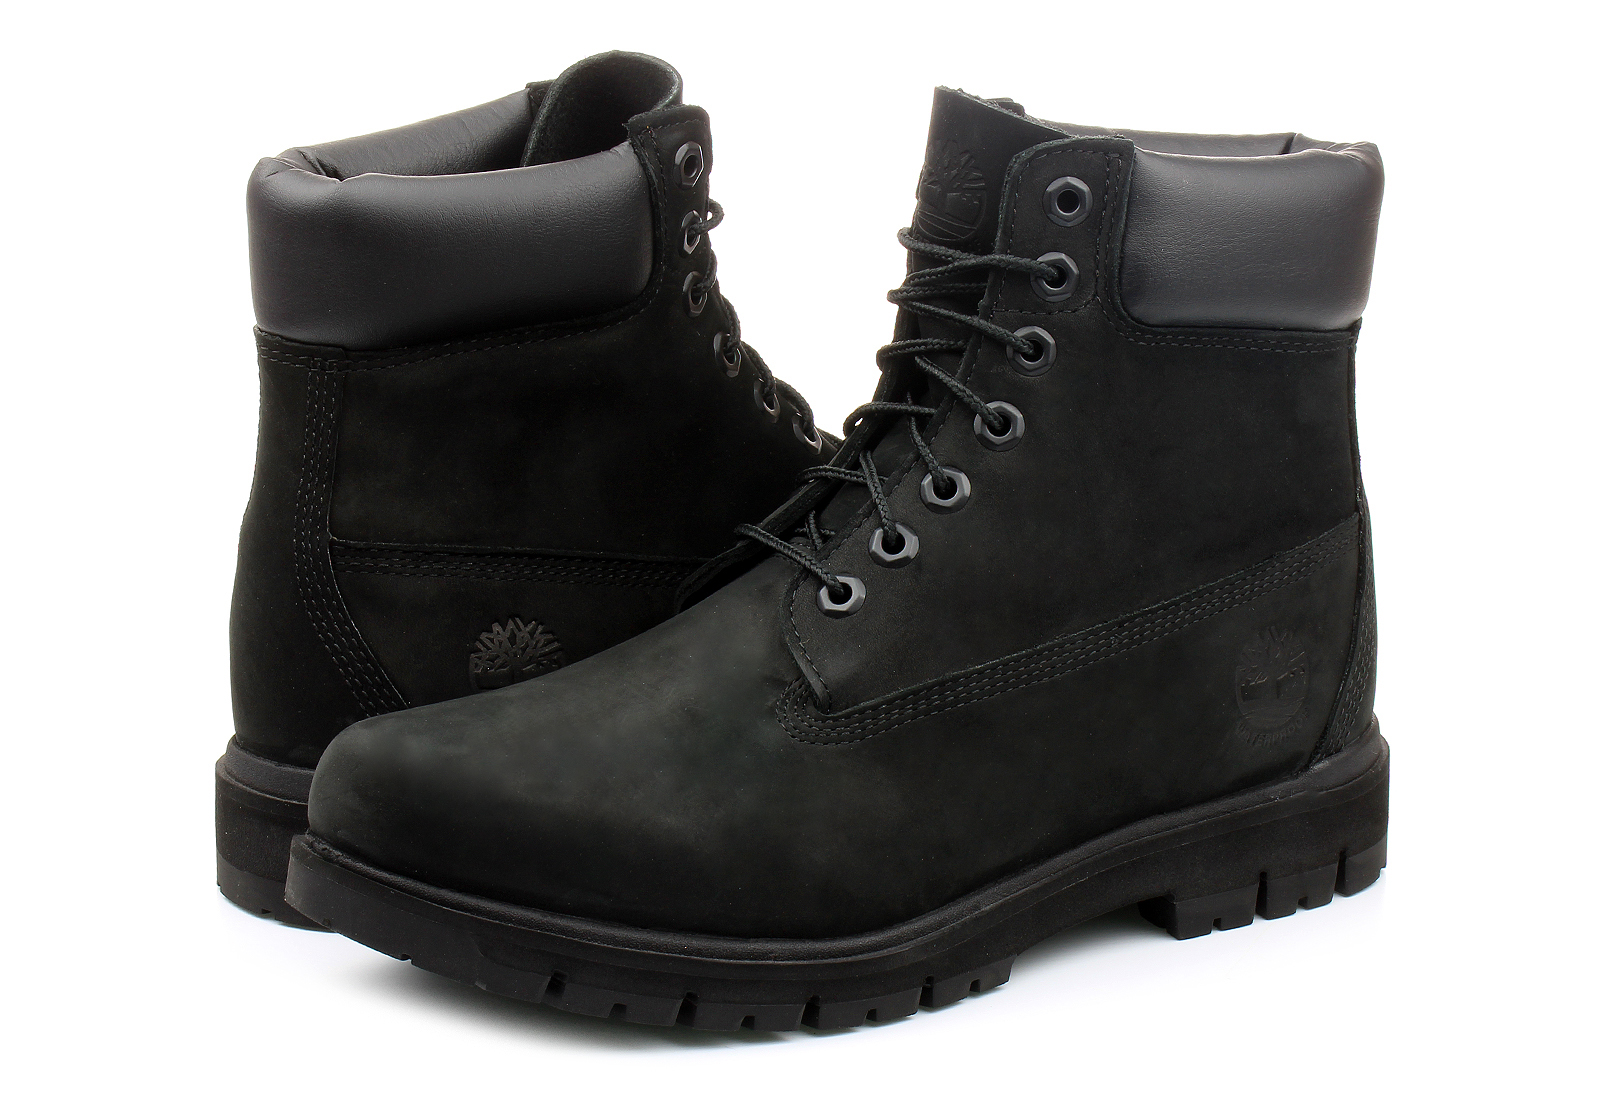 Alianza Calibre Ataque de nervios Timberland Outdoor boots - Radford 6 In - a1ji2-blk - Online shop for  sneakers, shoes and boots